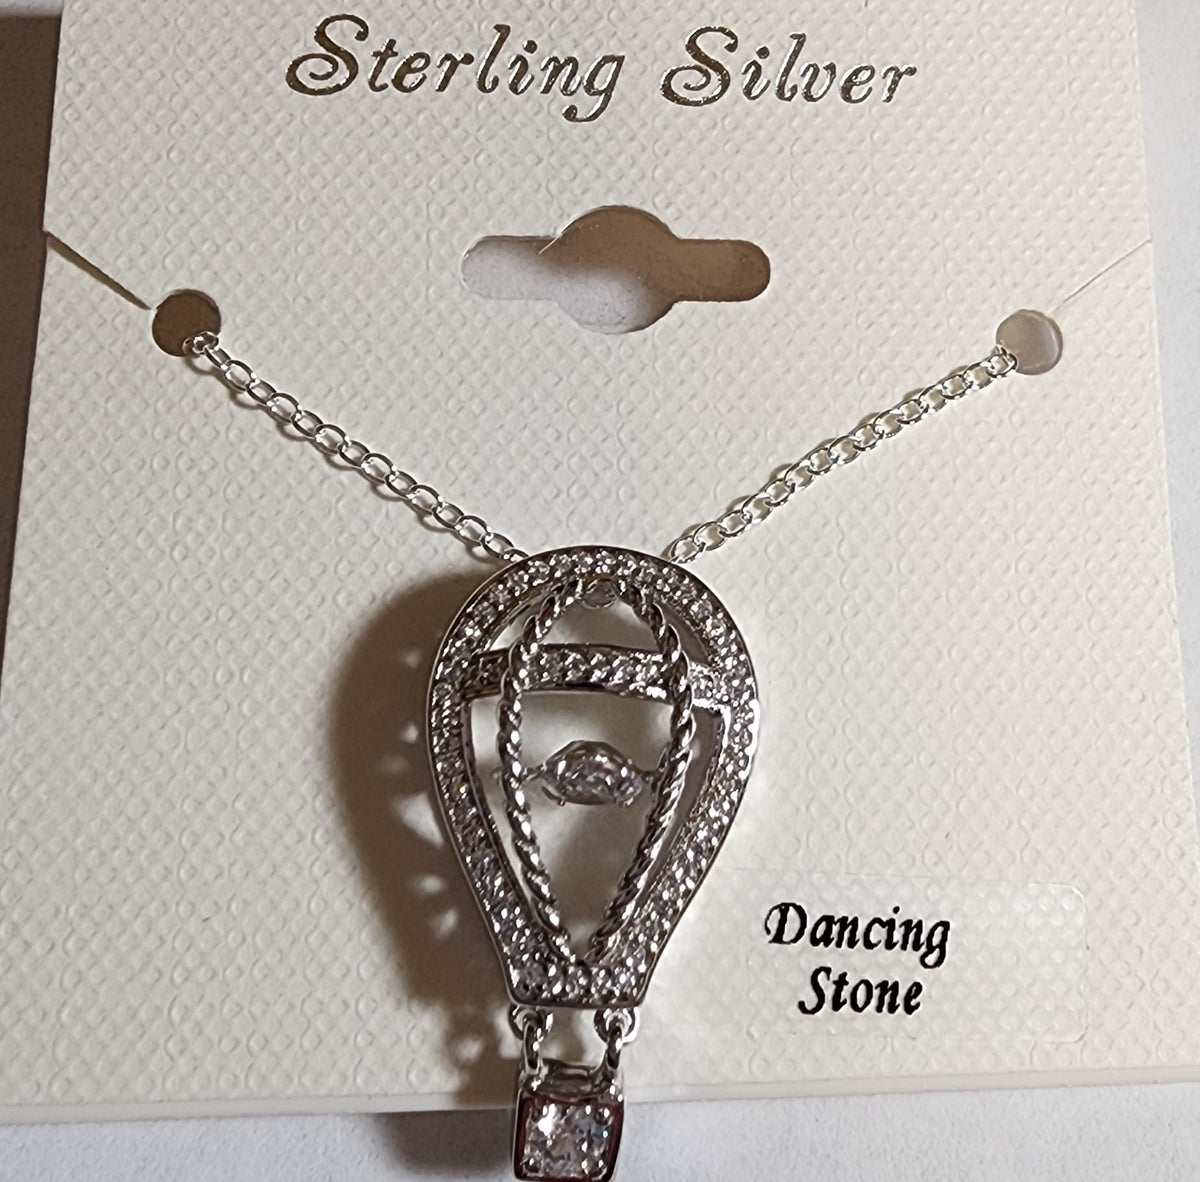 Sterling Silver Dancing Stone Necklace